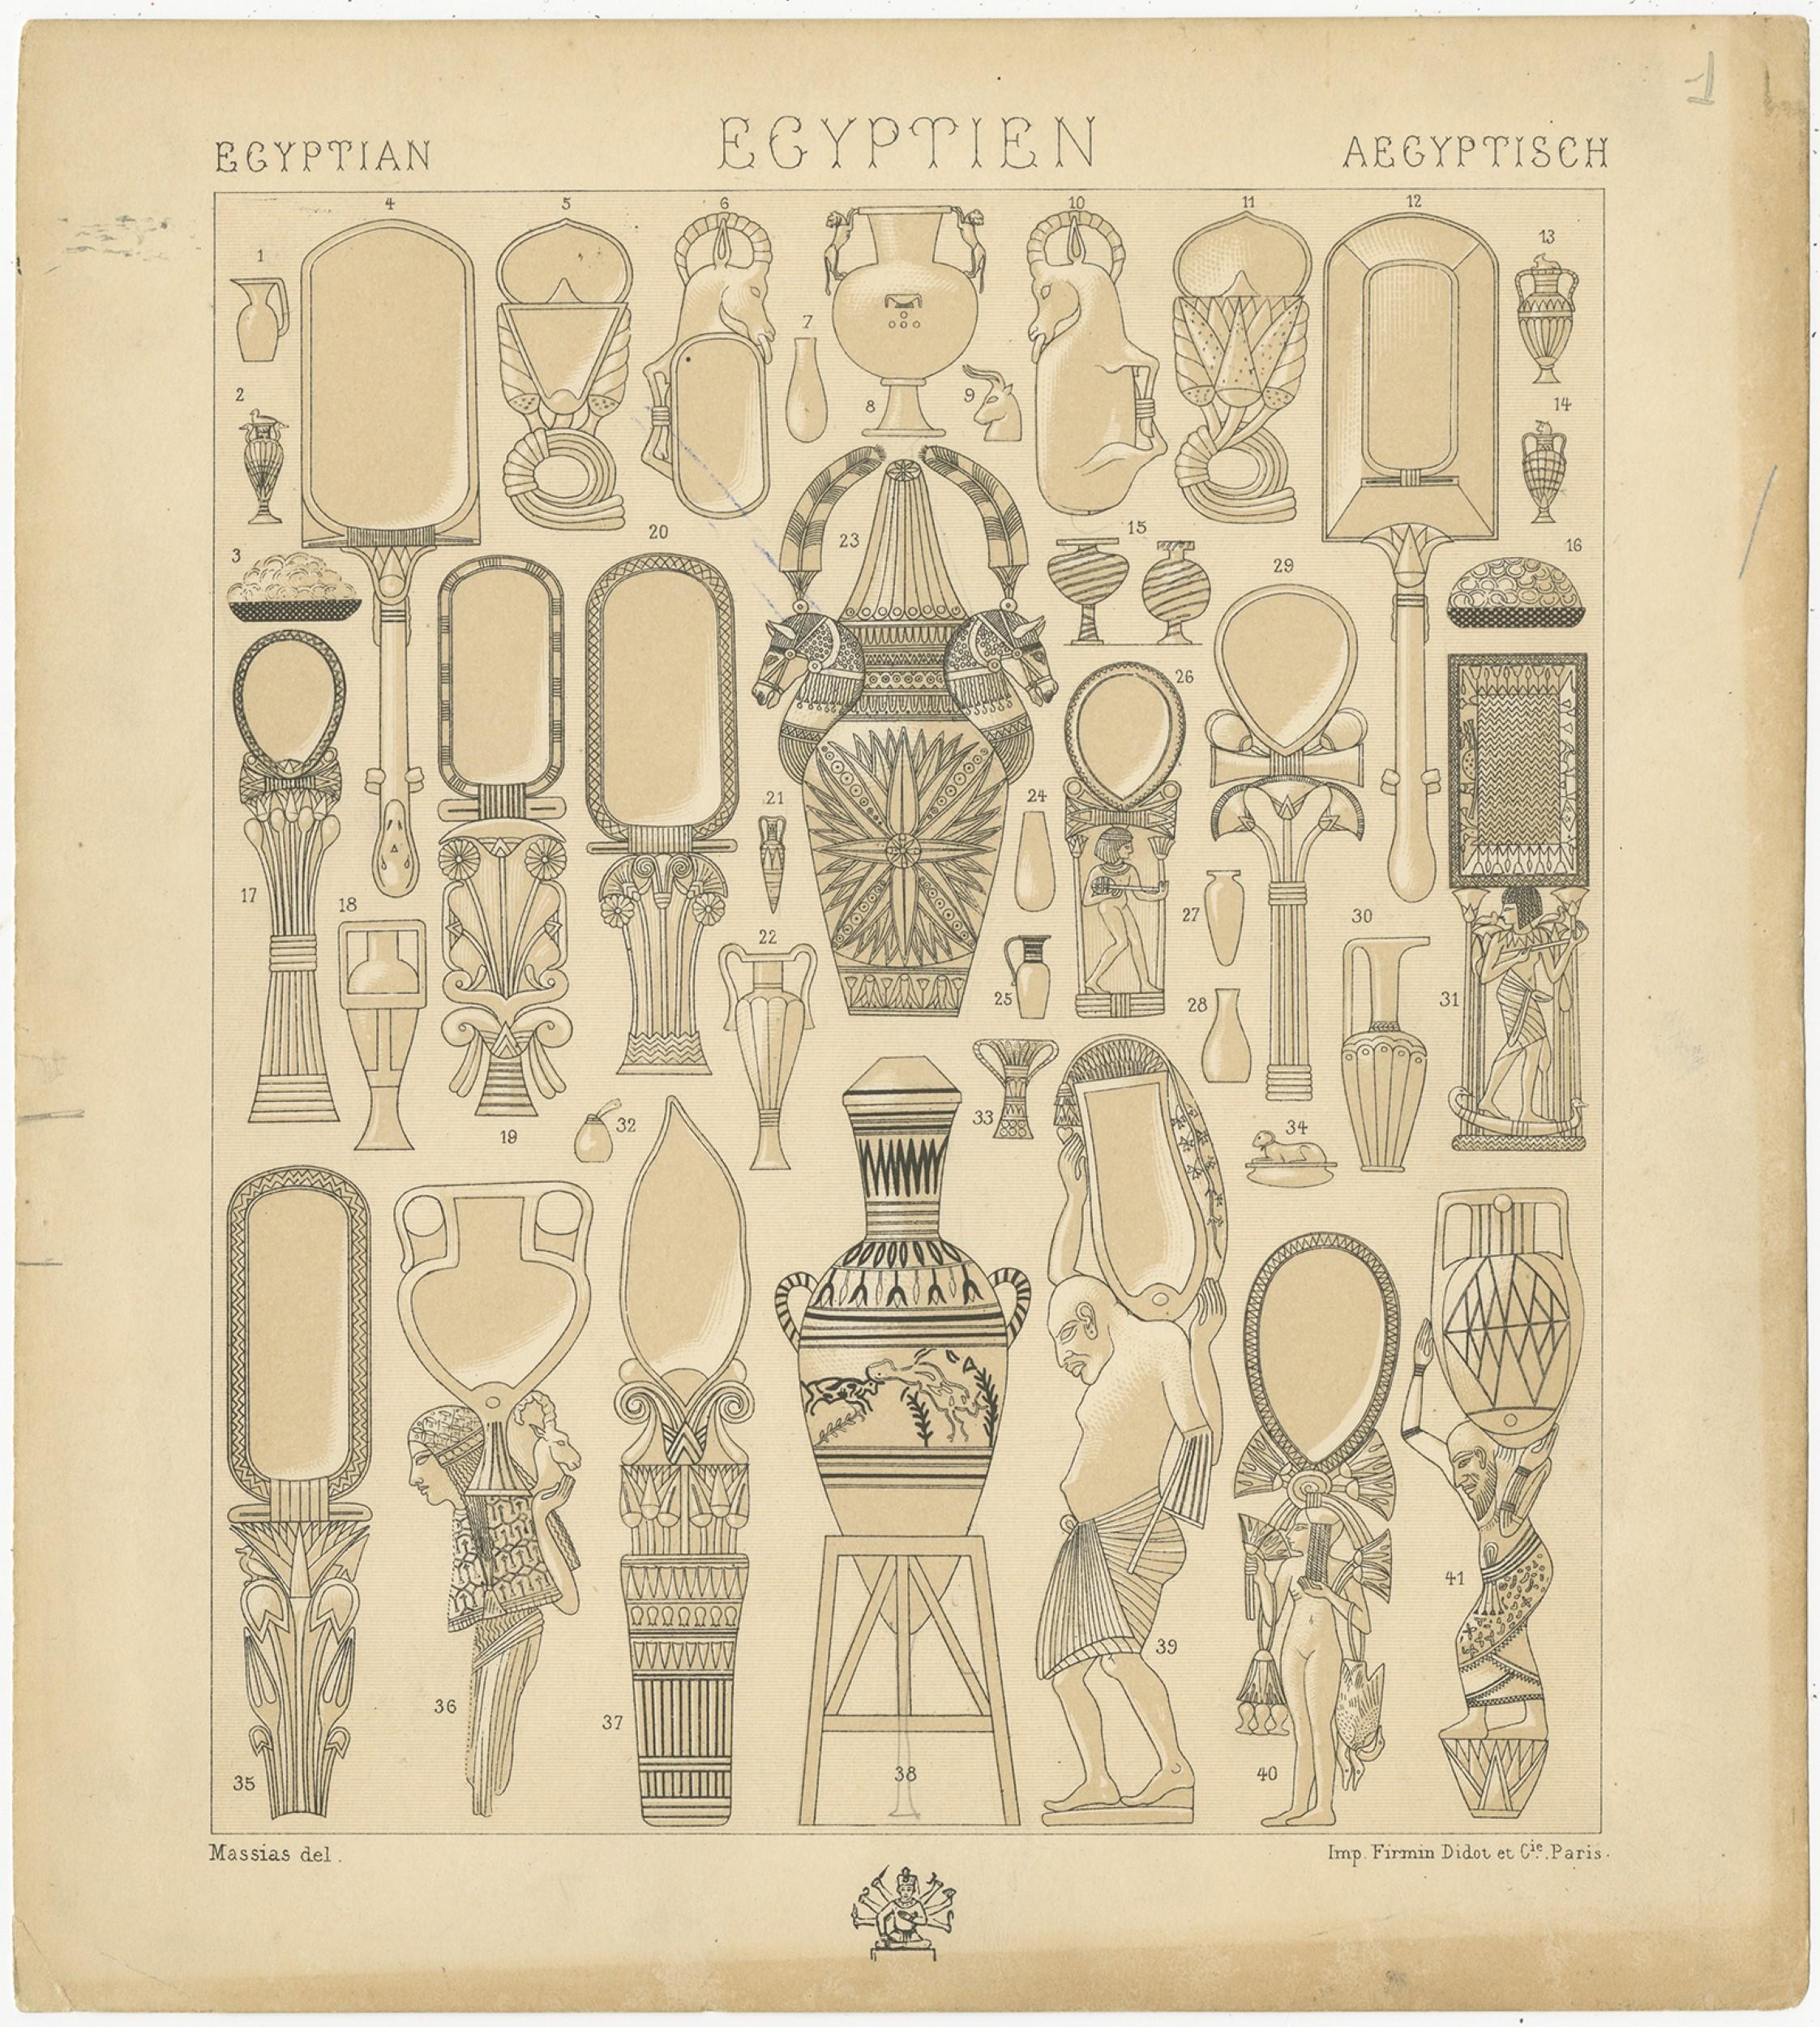 Antique print titled 'Egyptian - Egyptien - Aegyptisch'. Chromolithograph of Egyptian Decorative Objects. This print originates from 'Le Costume Historique' by M.A. Racinet. Published, circa 1880.
 
 